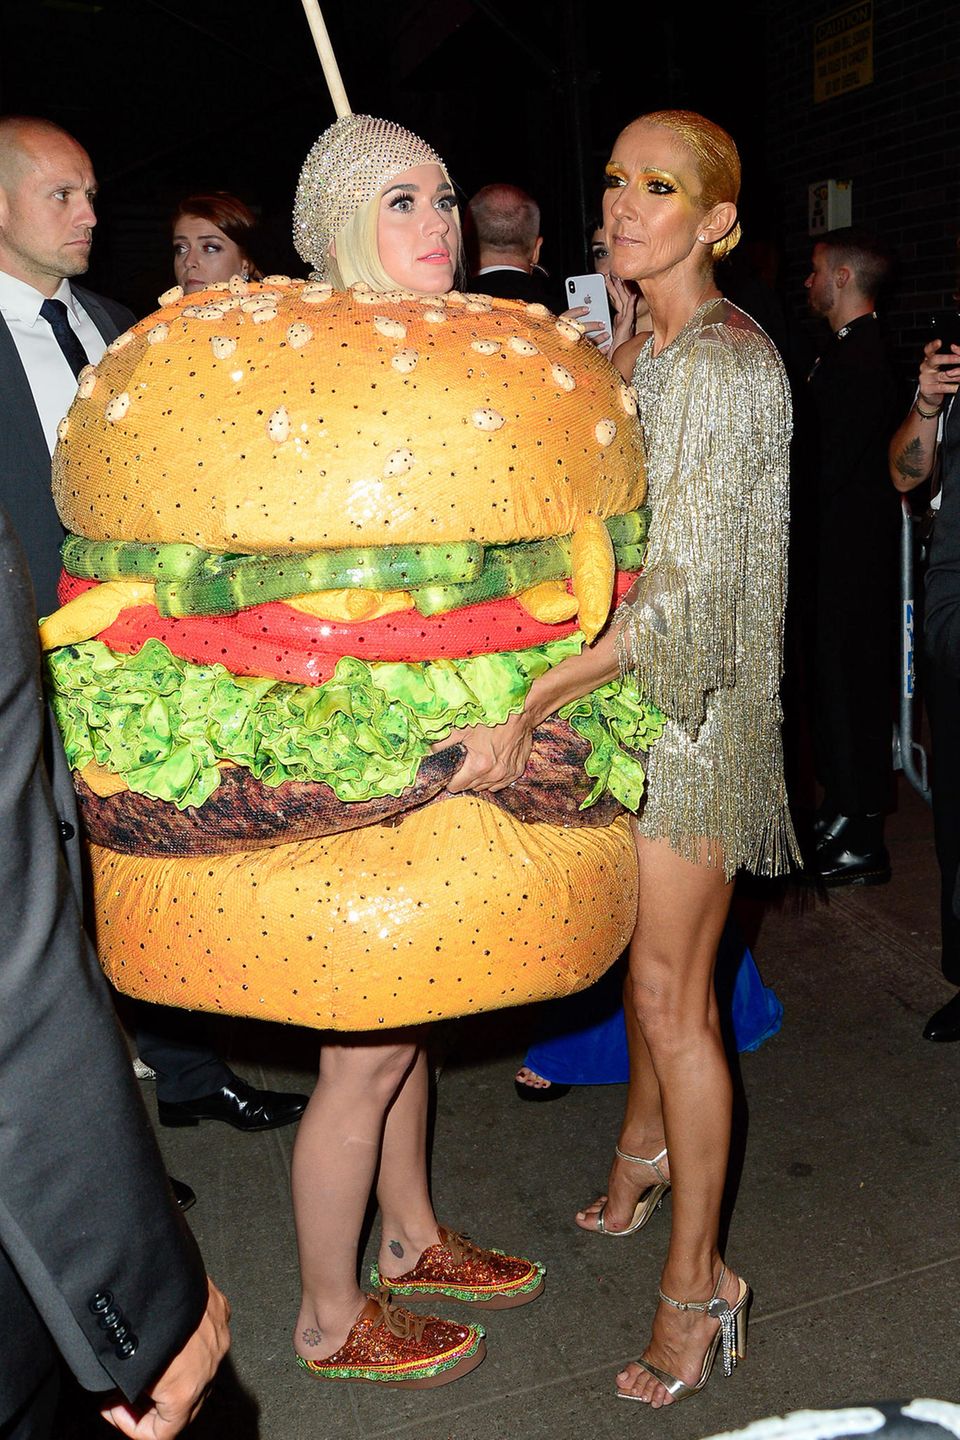 Cheeseburger-Alarm! Ob Celine Dion beim Anblick von Katy Perrys Aftershow-Look wohl Hunger bekommt?